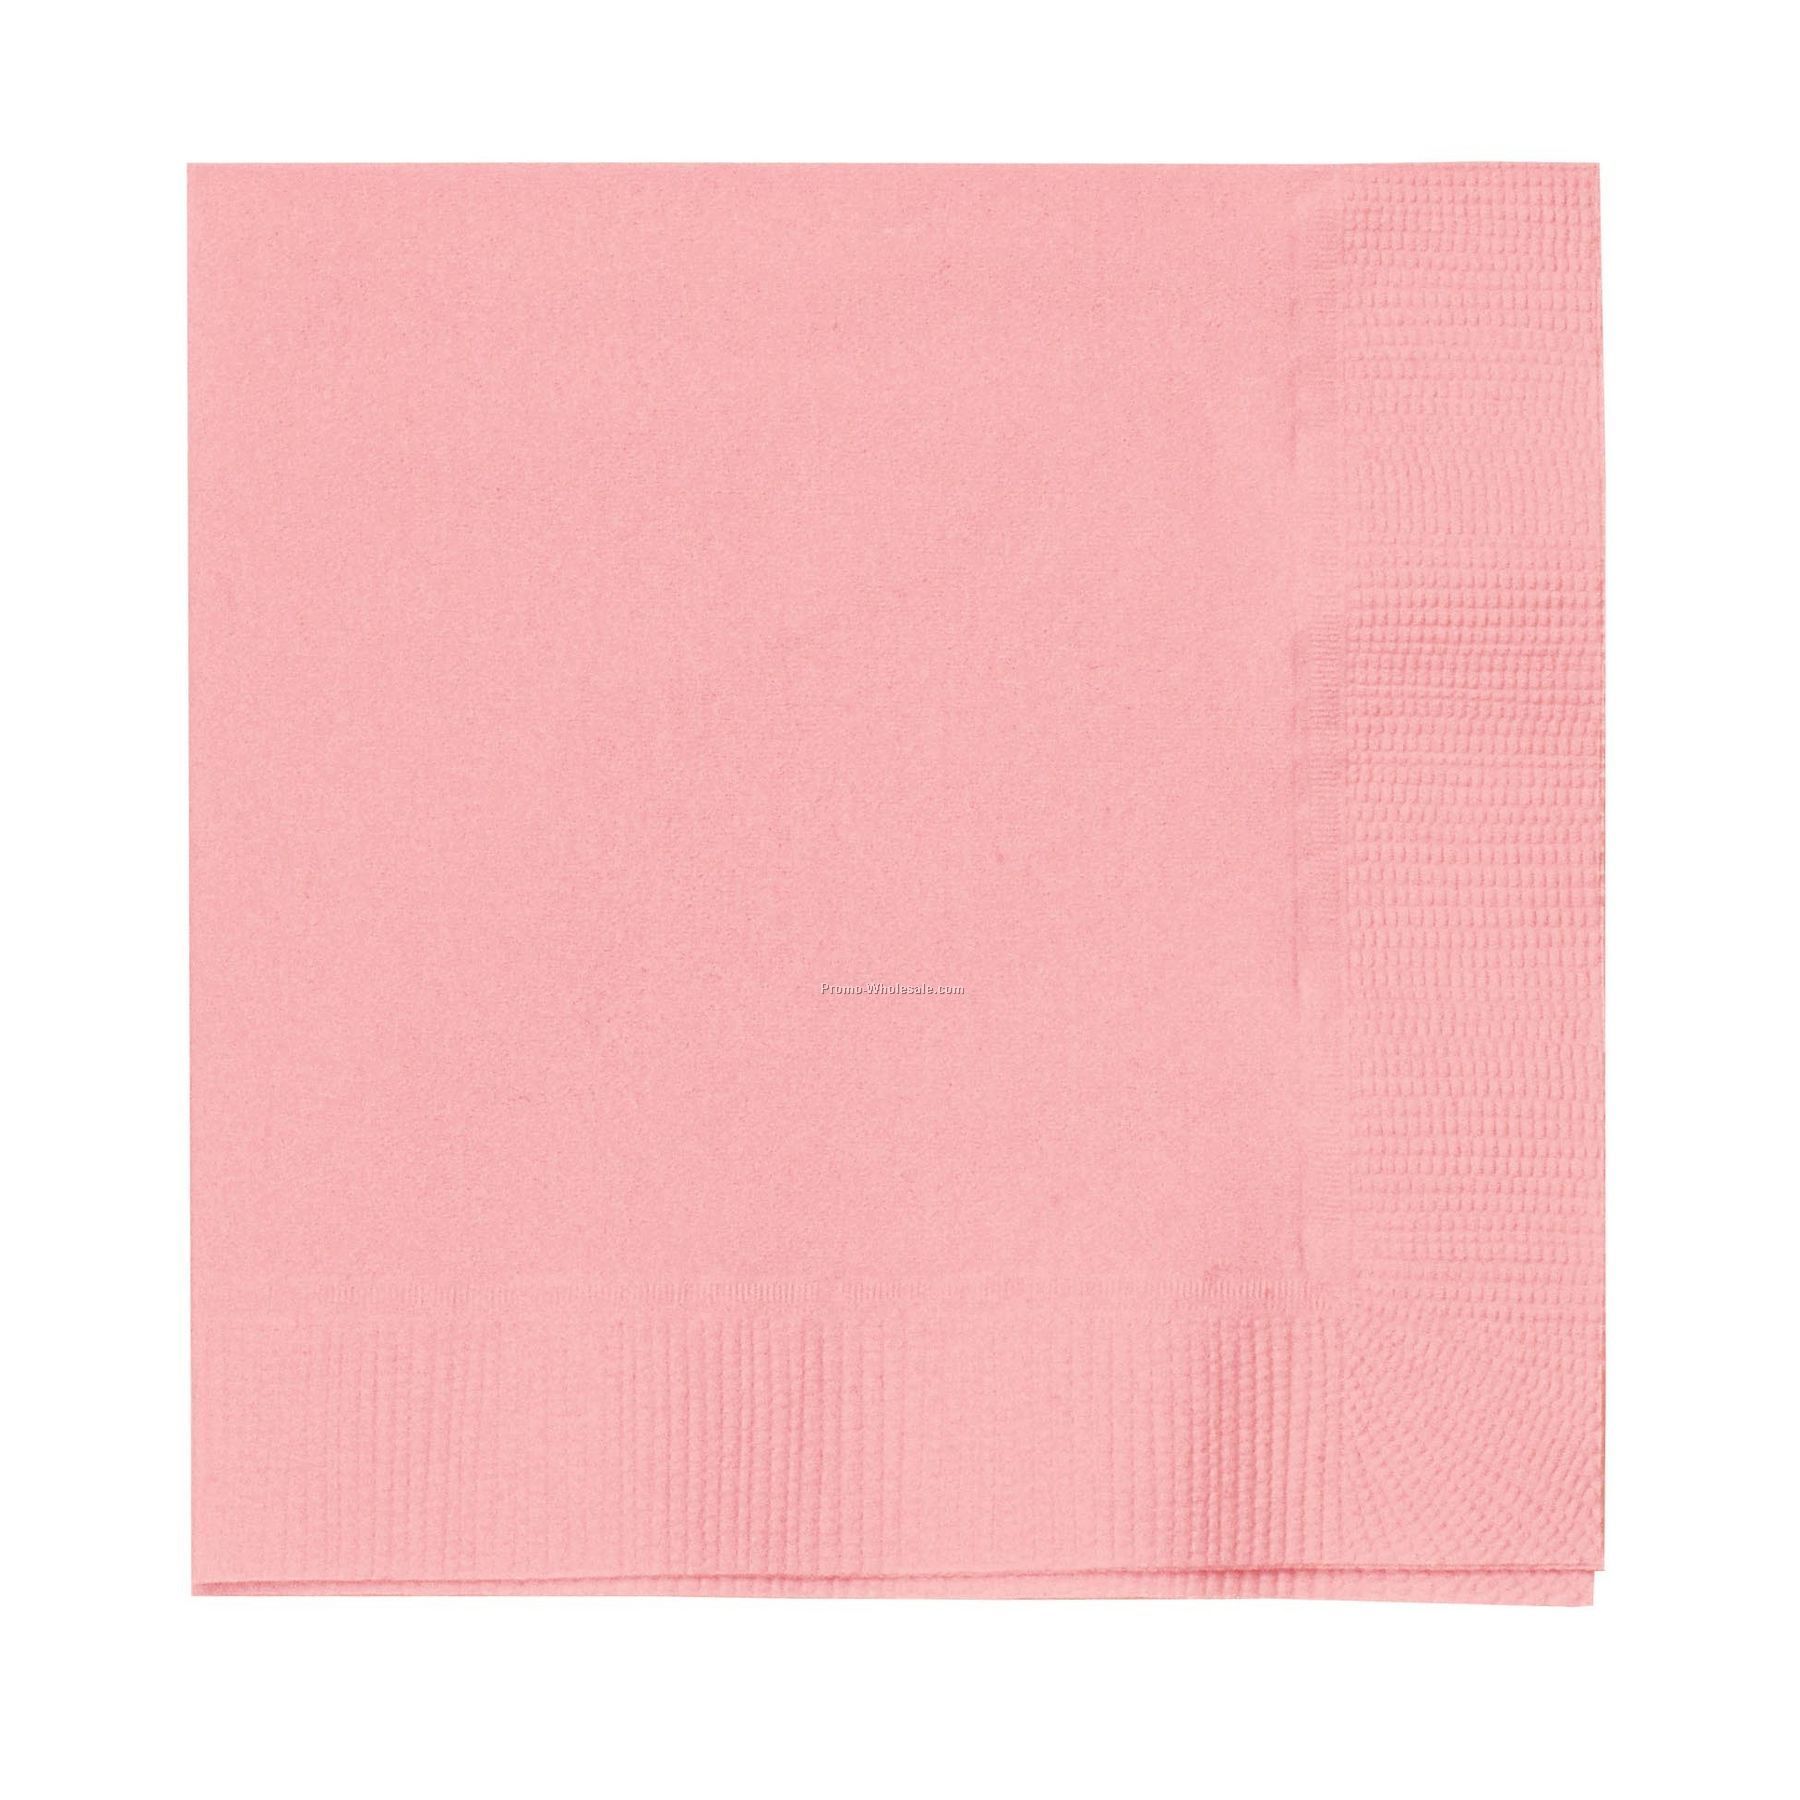 The 500 Line Colorware Classic Pink Dinner Napkins W/ 1/4 Fold